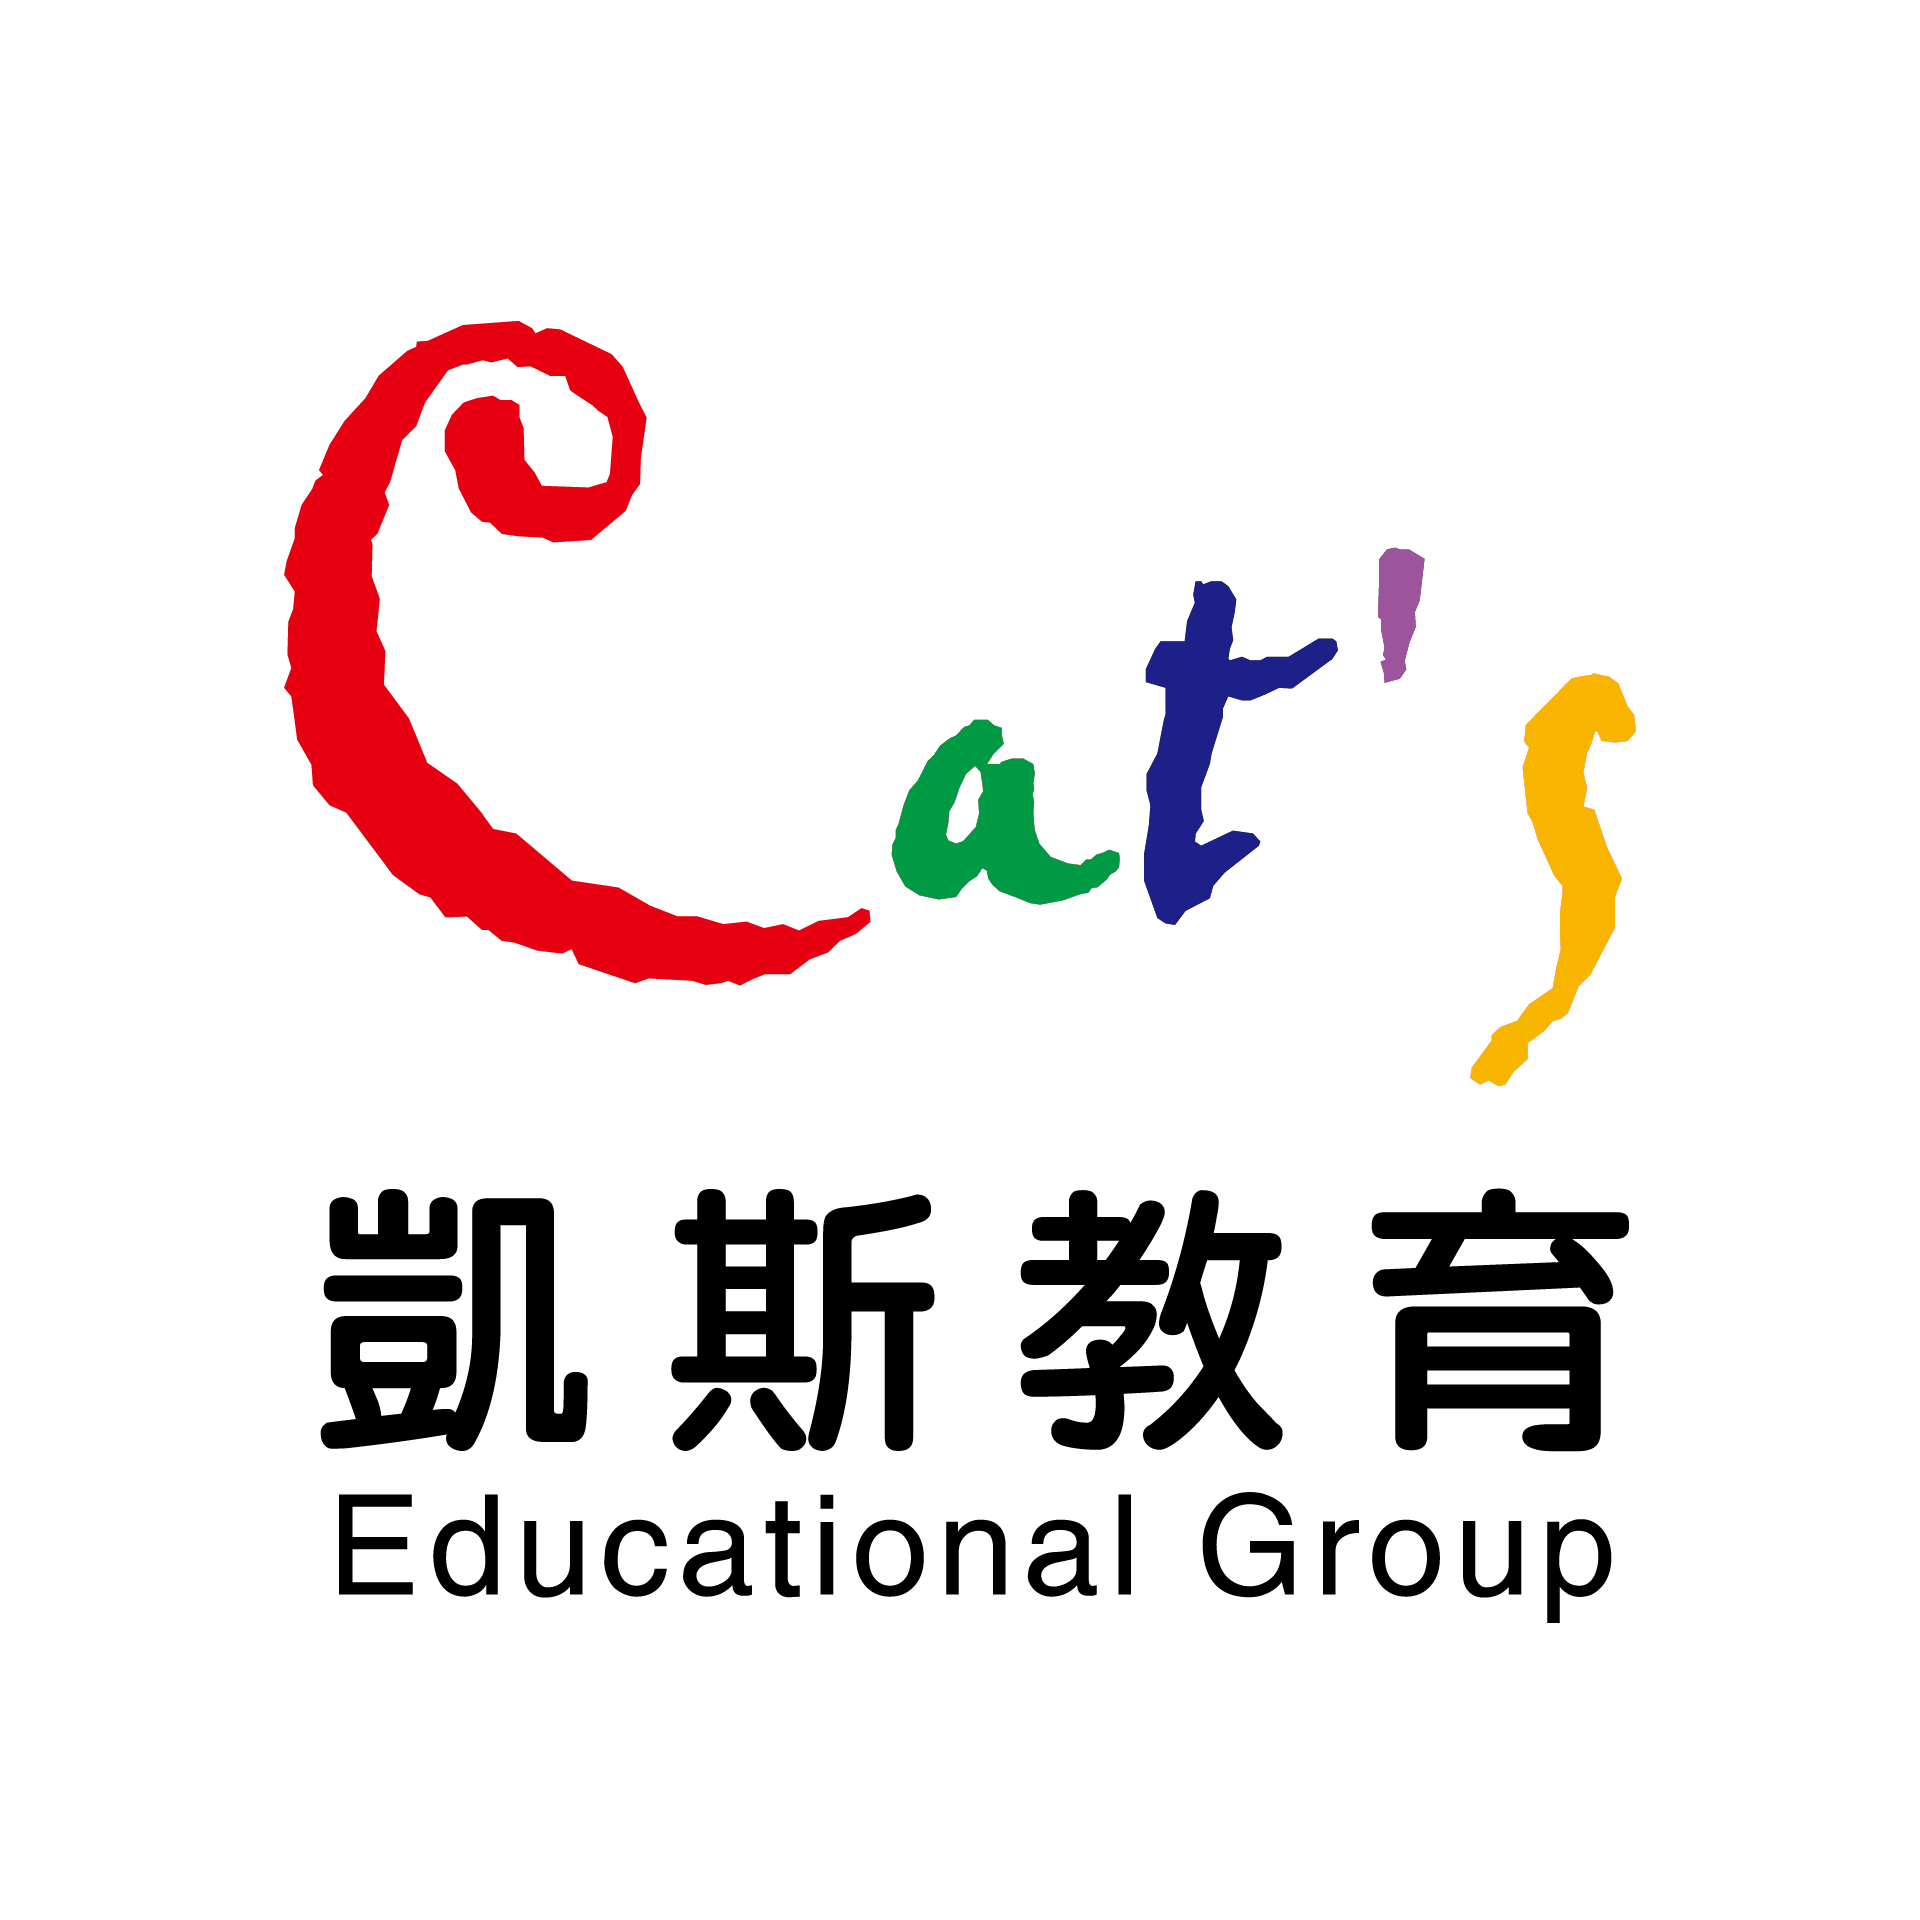 Teaching English and Living in Taiwan Jobs Available 教學工作, Cat’s Educational Group HIGH Salaries! Up to 20hrs / Week! Teaching Just FOUR Days a Week - AFTERNOONS from 1:30pm to 6:50pm COMPLETE Curriculum! AMAZING Environment! image